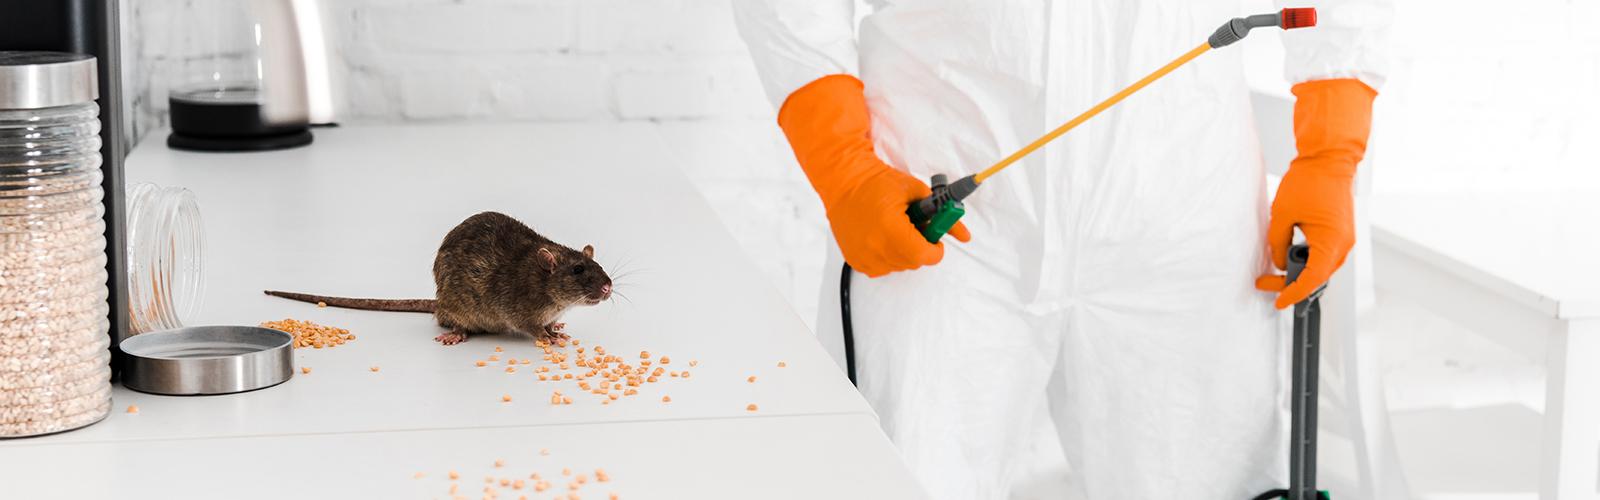 rodent control services ibiza